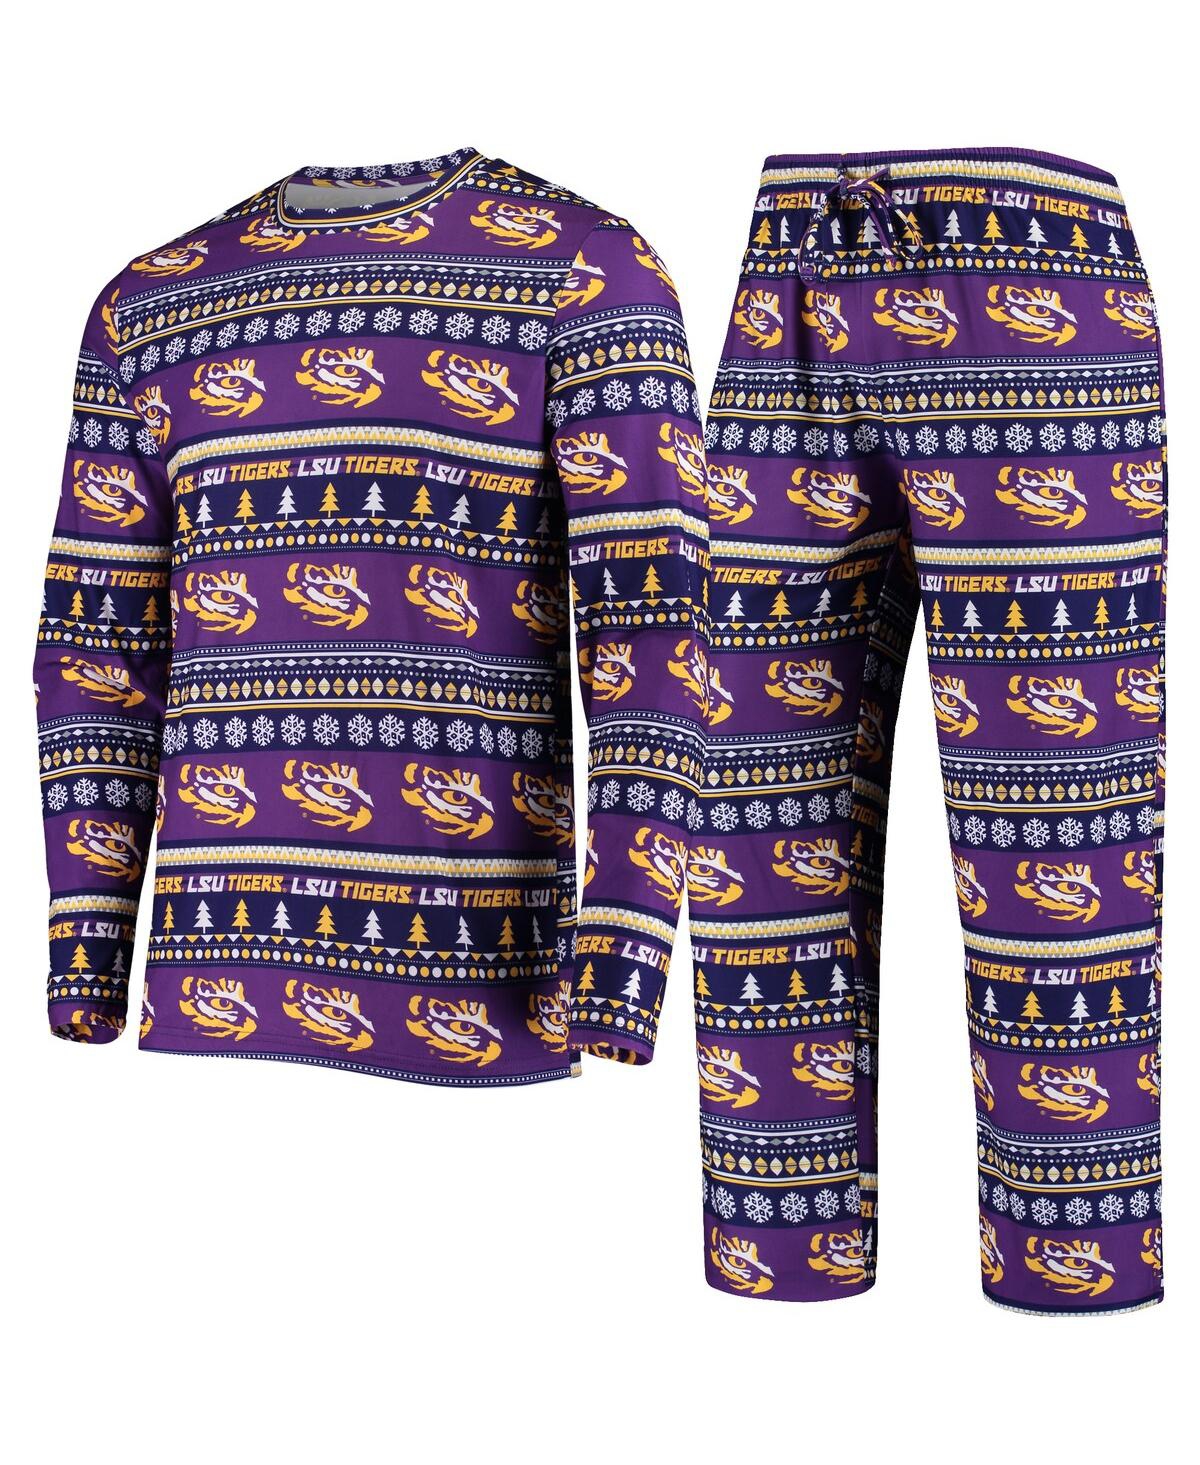 Men's Concepts Sport Purple Lsu Tigers Ugly Sweater Knit Long Sleeve Top and Pant Set - Purple